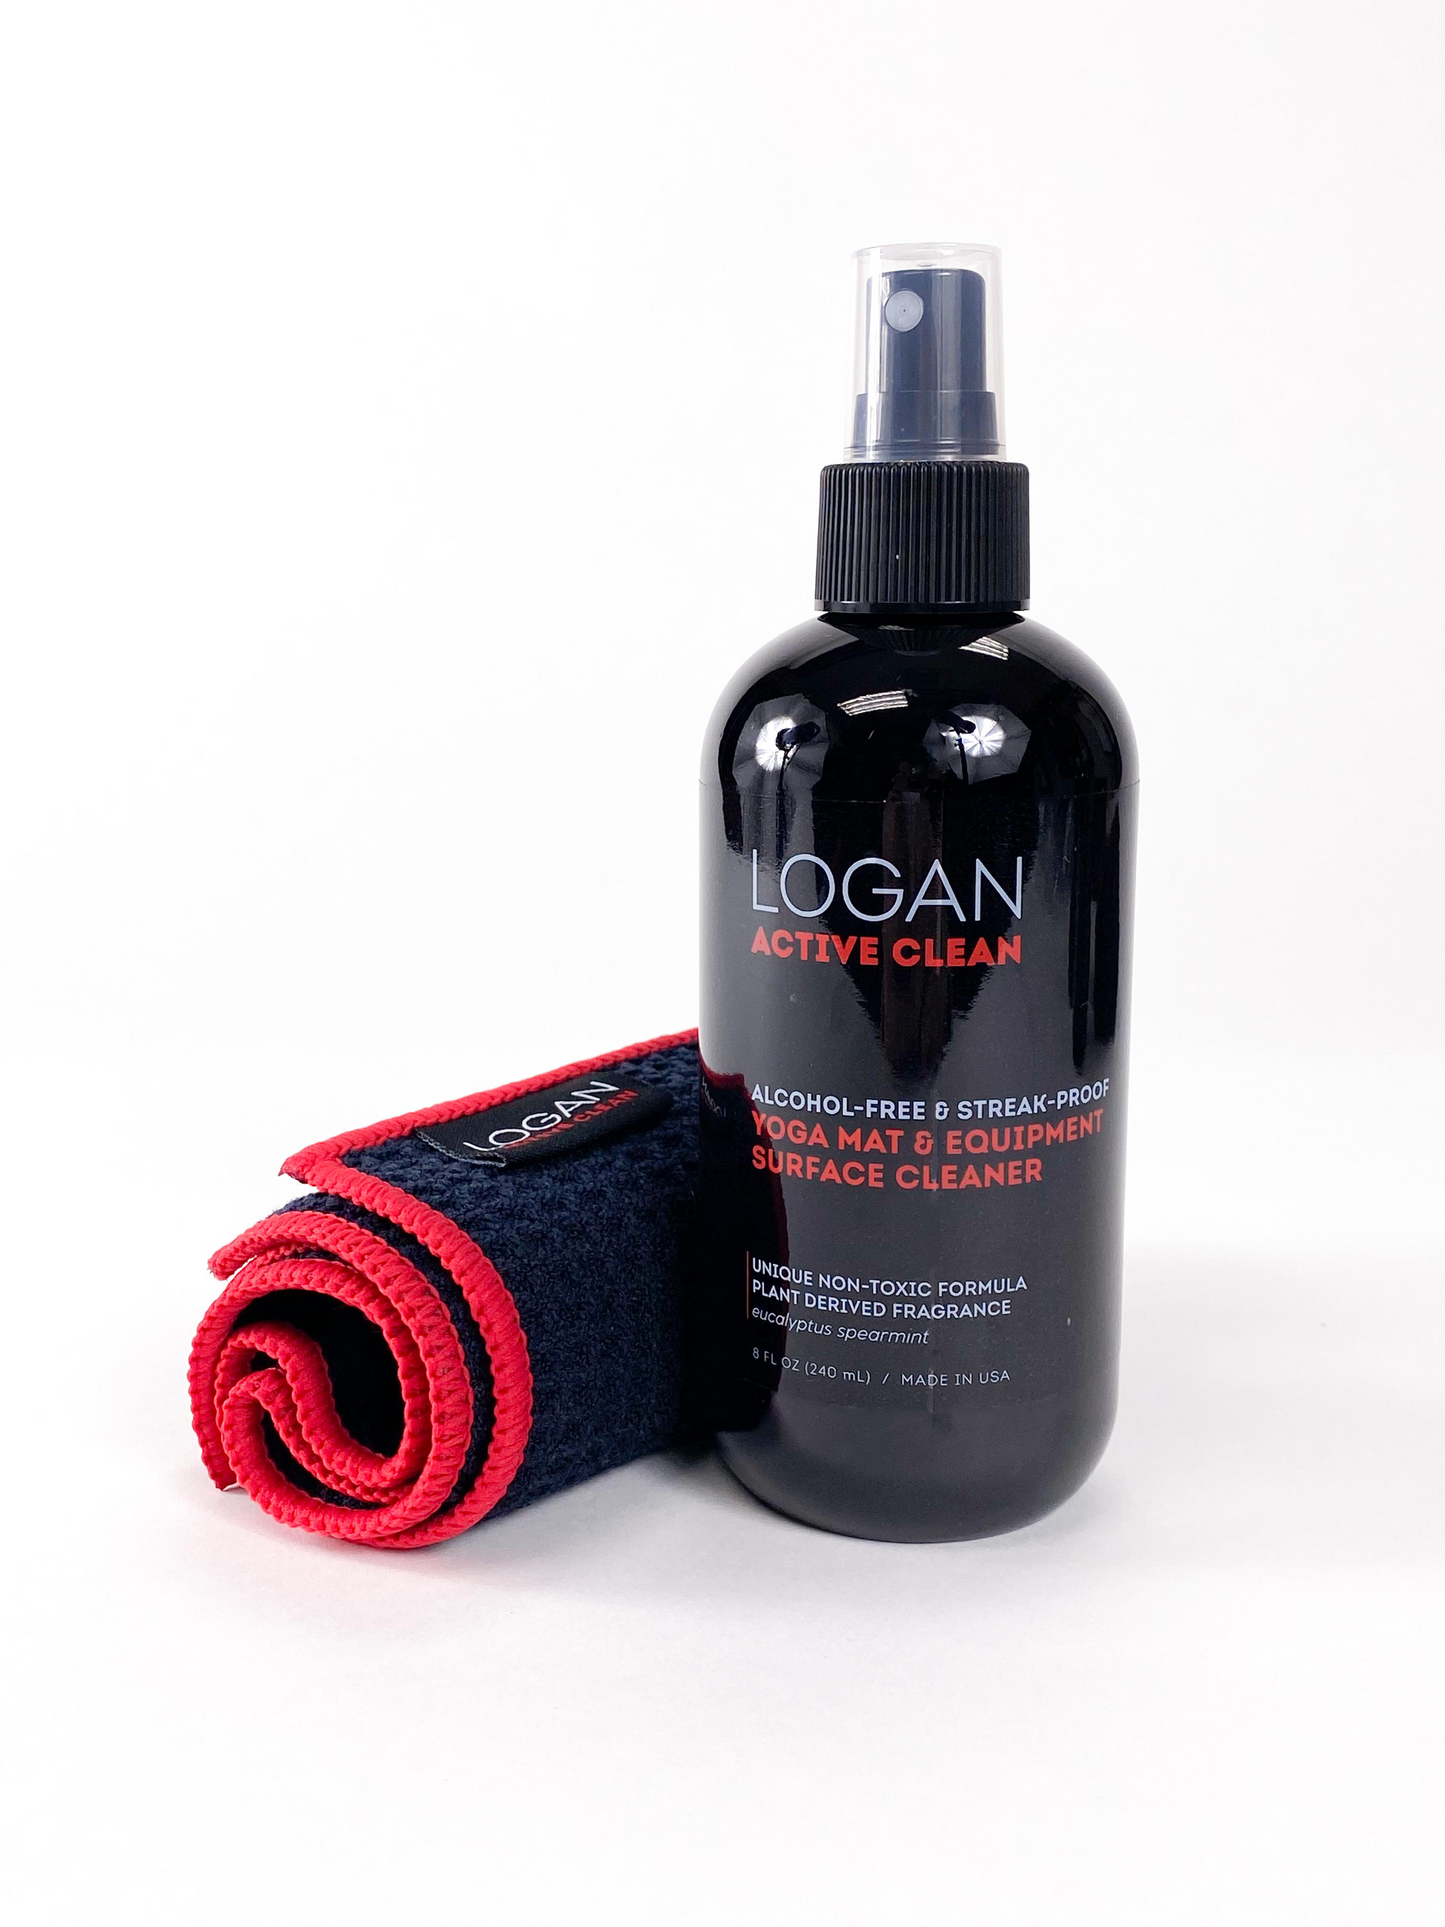 The Active Clean Duo - Yoga Mat & Equipment Surface Cleaner and Microfiber Towel - Amazing On All Surfaces